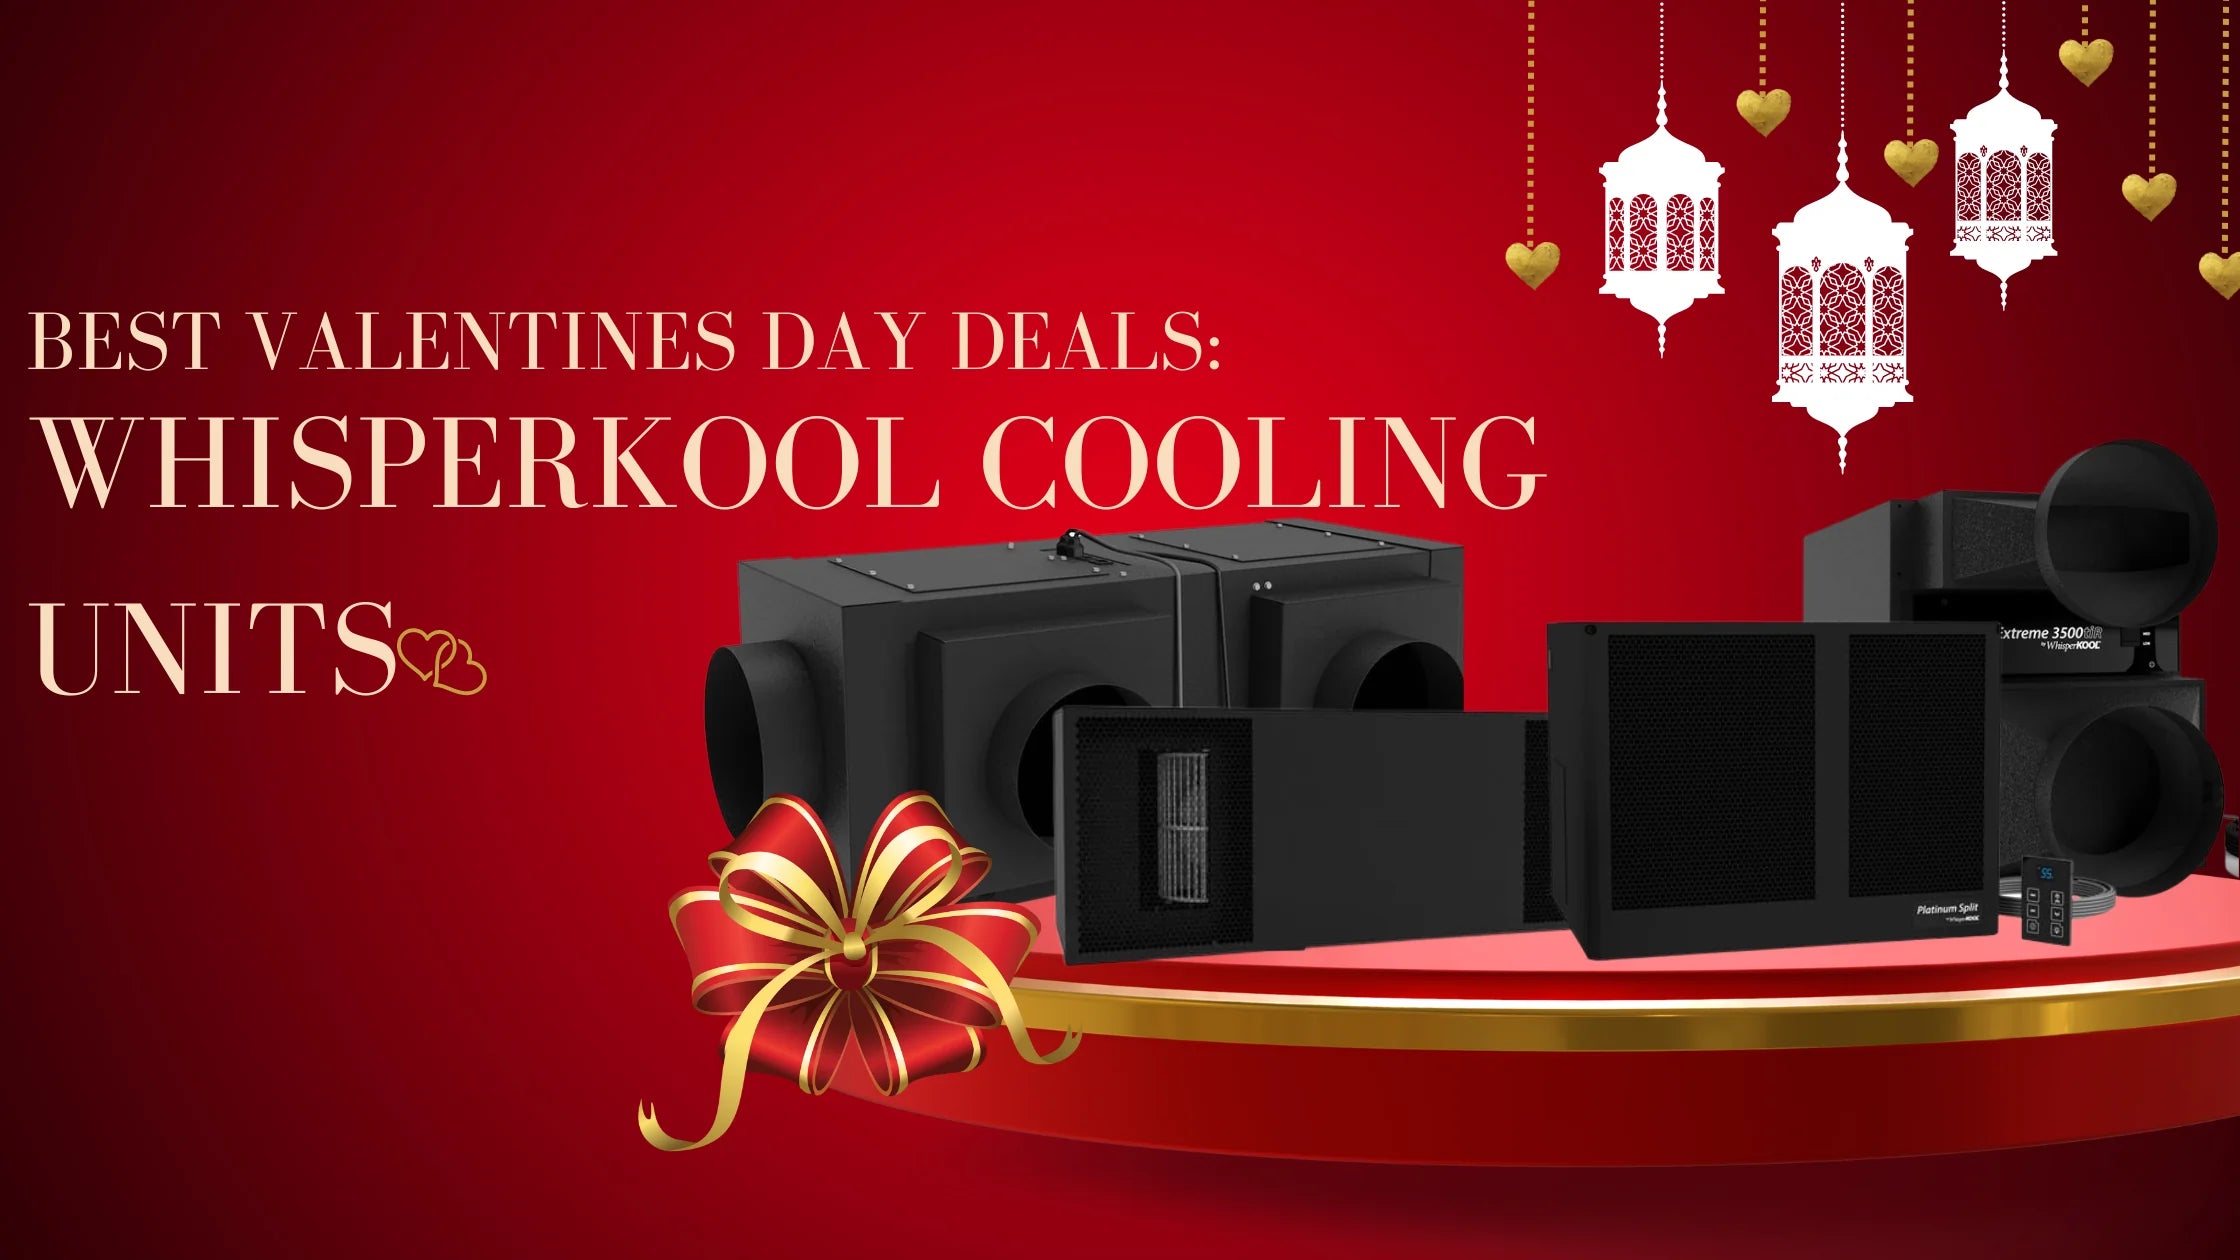 Best Valentine's Day Deals: WhisperKOOL Cooling Units - WhisperKOOL | Wine Coolers Empire - Trusted Dealer